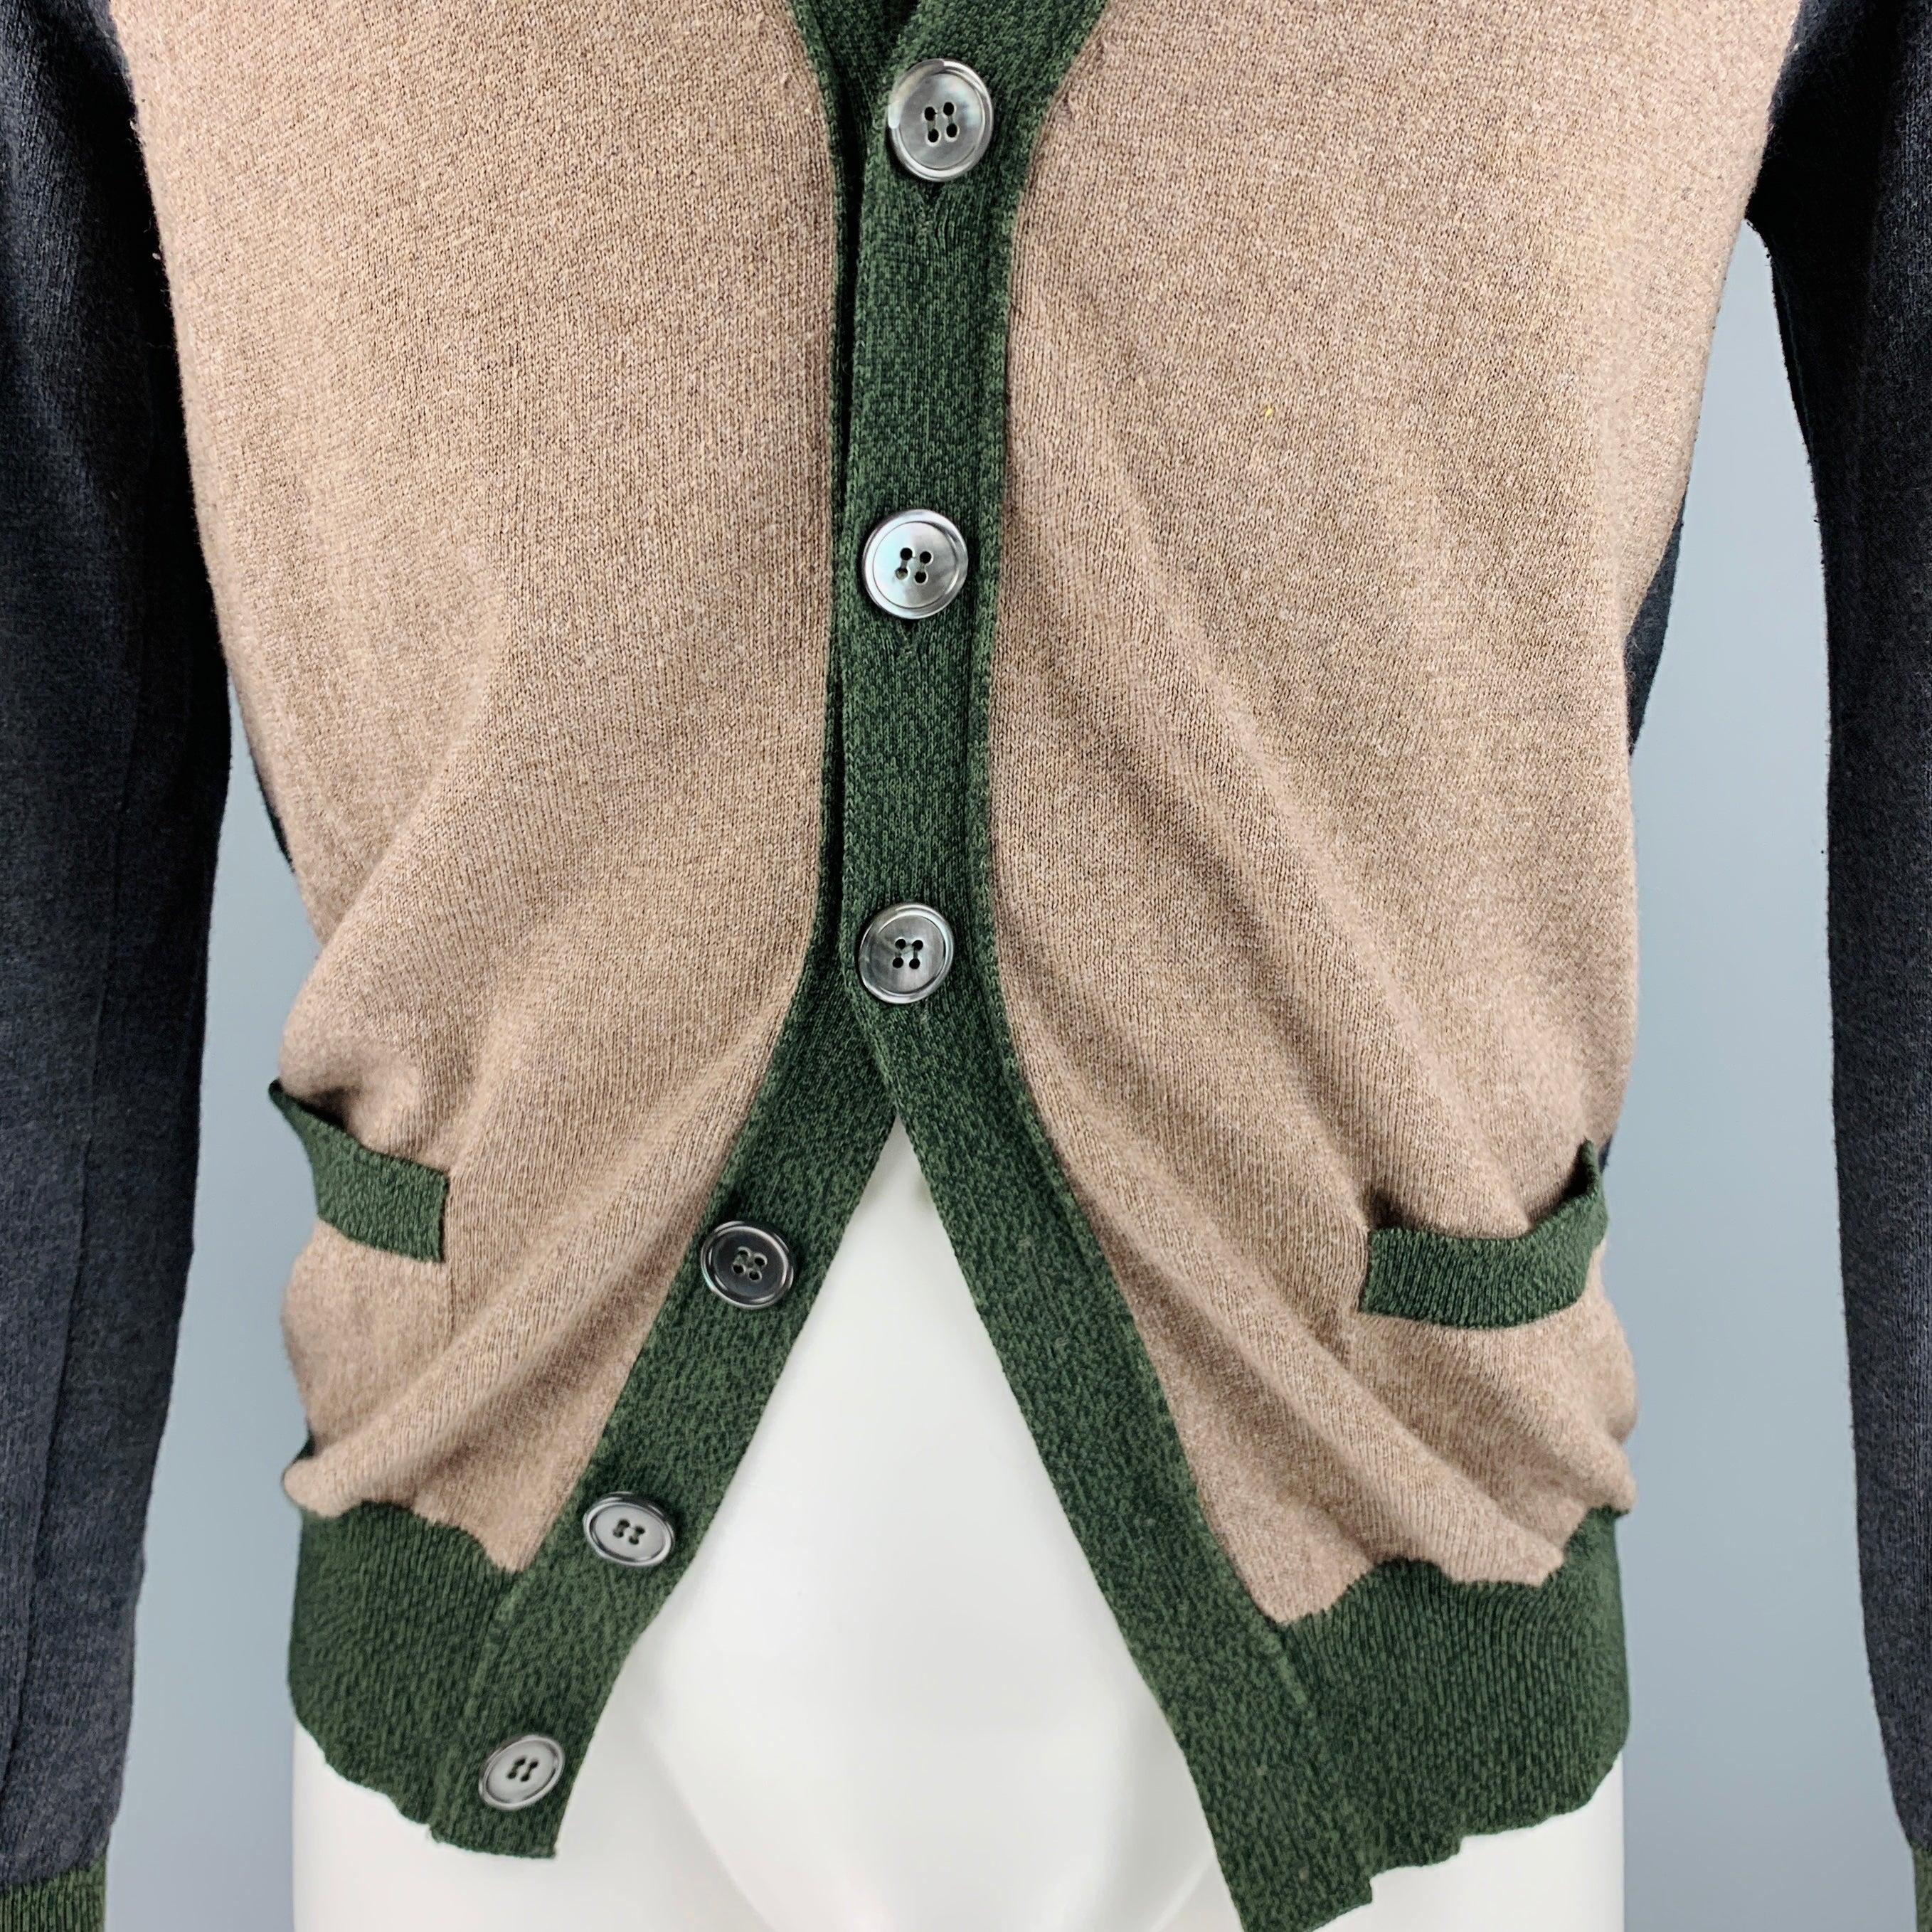 GOLDEN GOOSE cardigan
in a
brown and grey merino wool cotton blend knit featuring a color block style, two pockets, and button closure. Made in Italy.Very Good Pre-Owned Condition. Moderate signs of wear. 

Marked:   M 

Measurements: 
 
Shoulder: